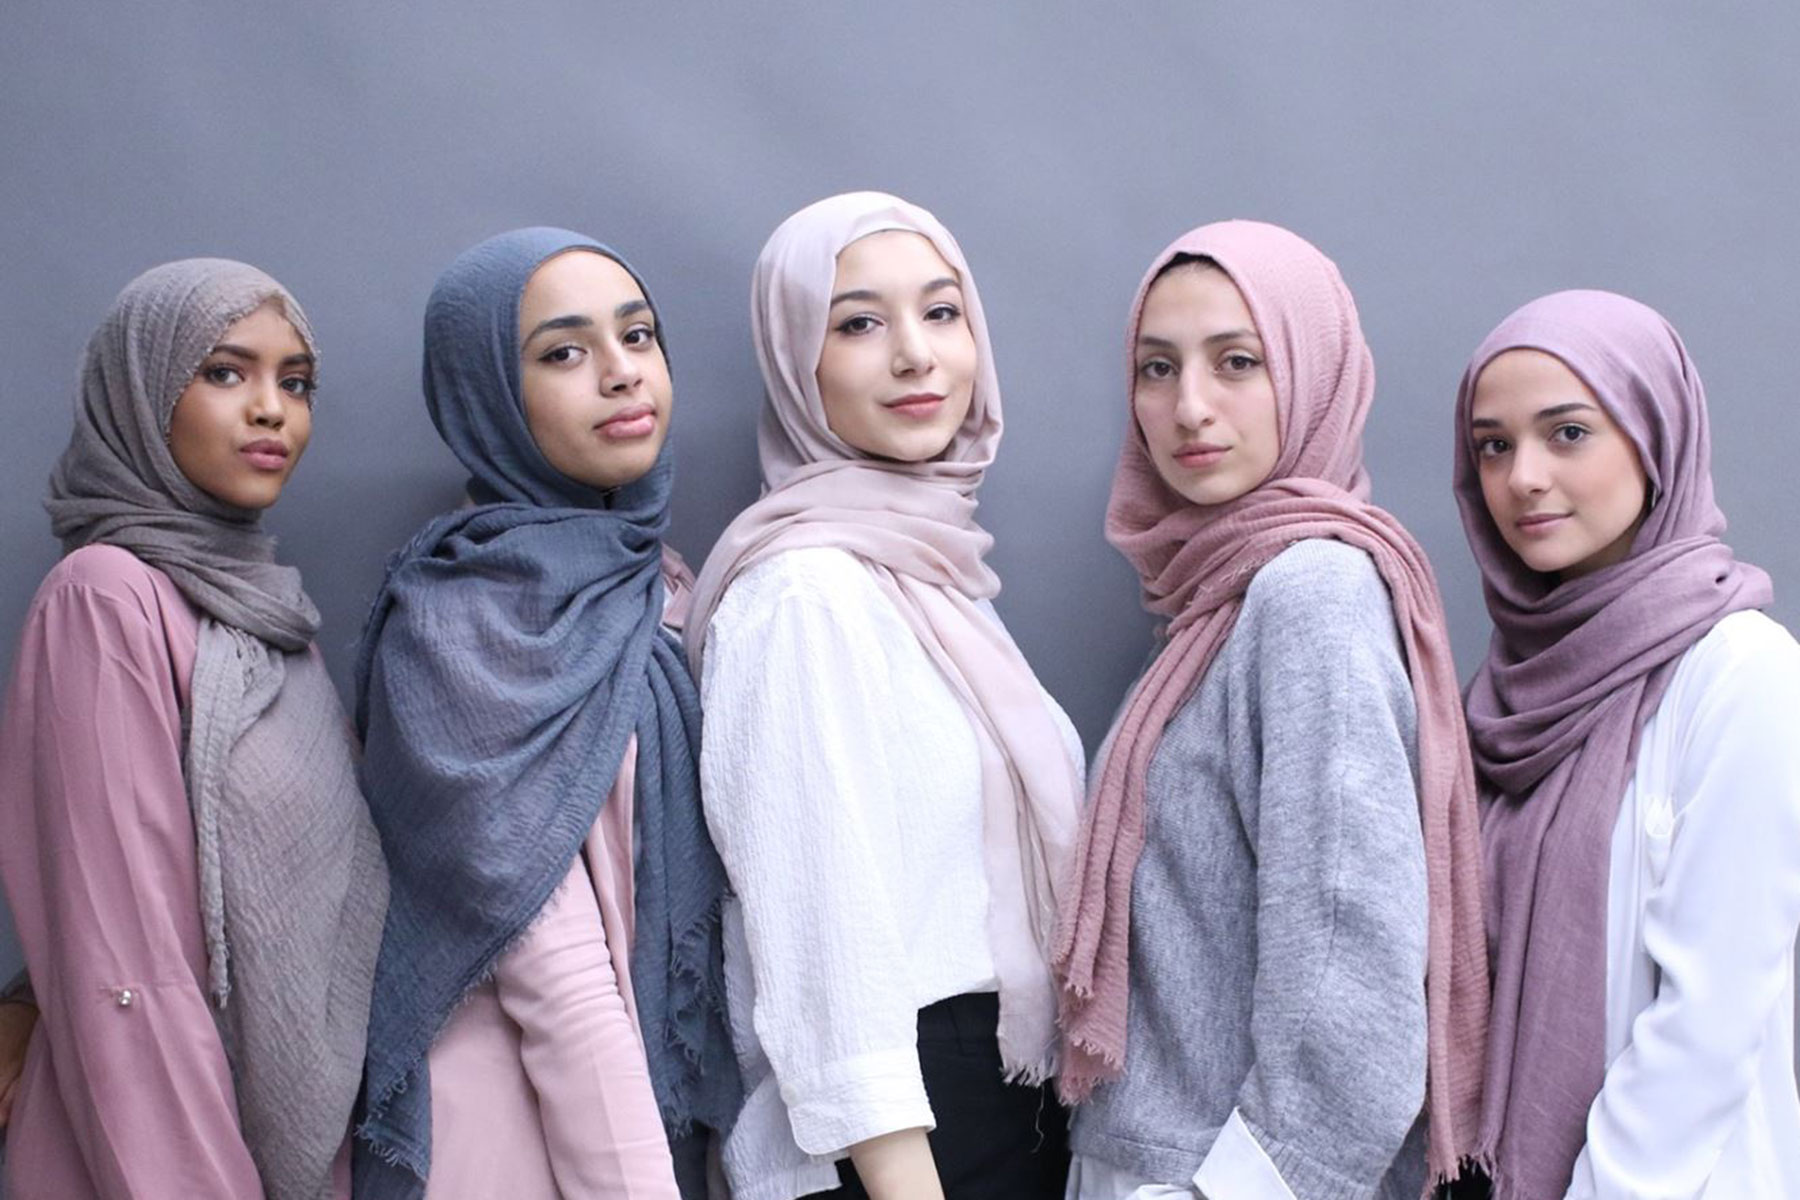 What Does Hijab Mean to You? AboutIslam Audience Have Their Say